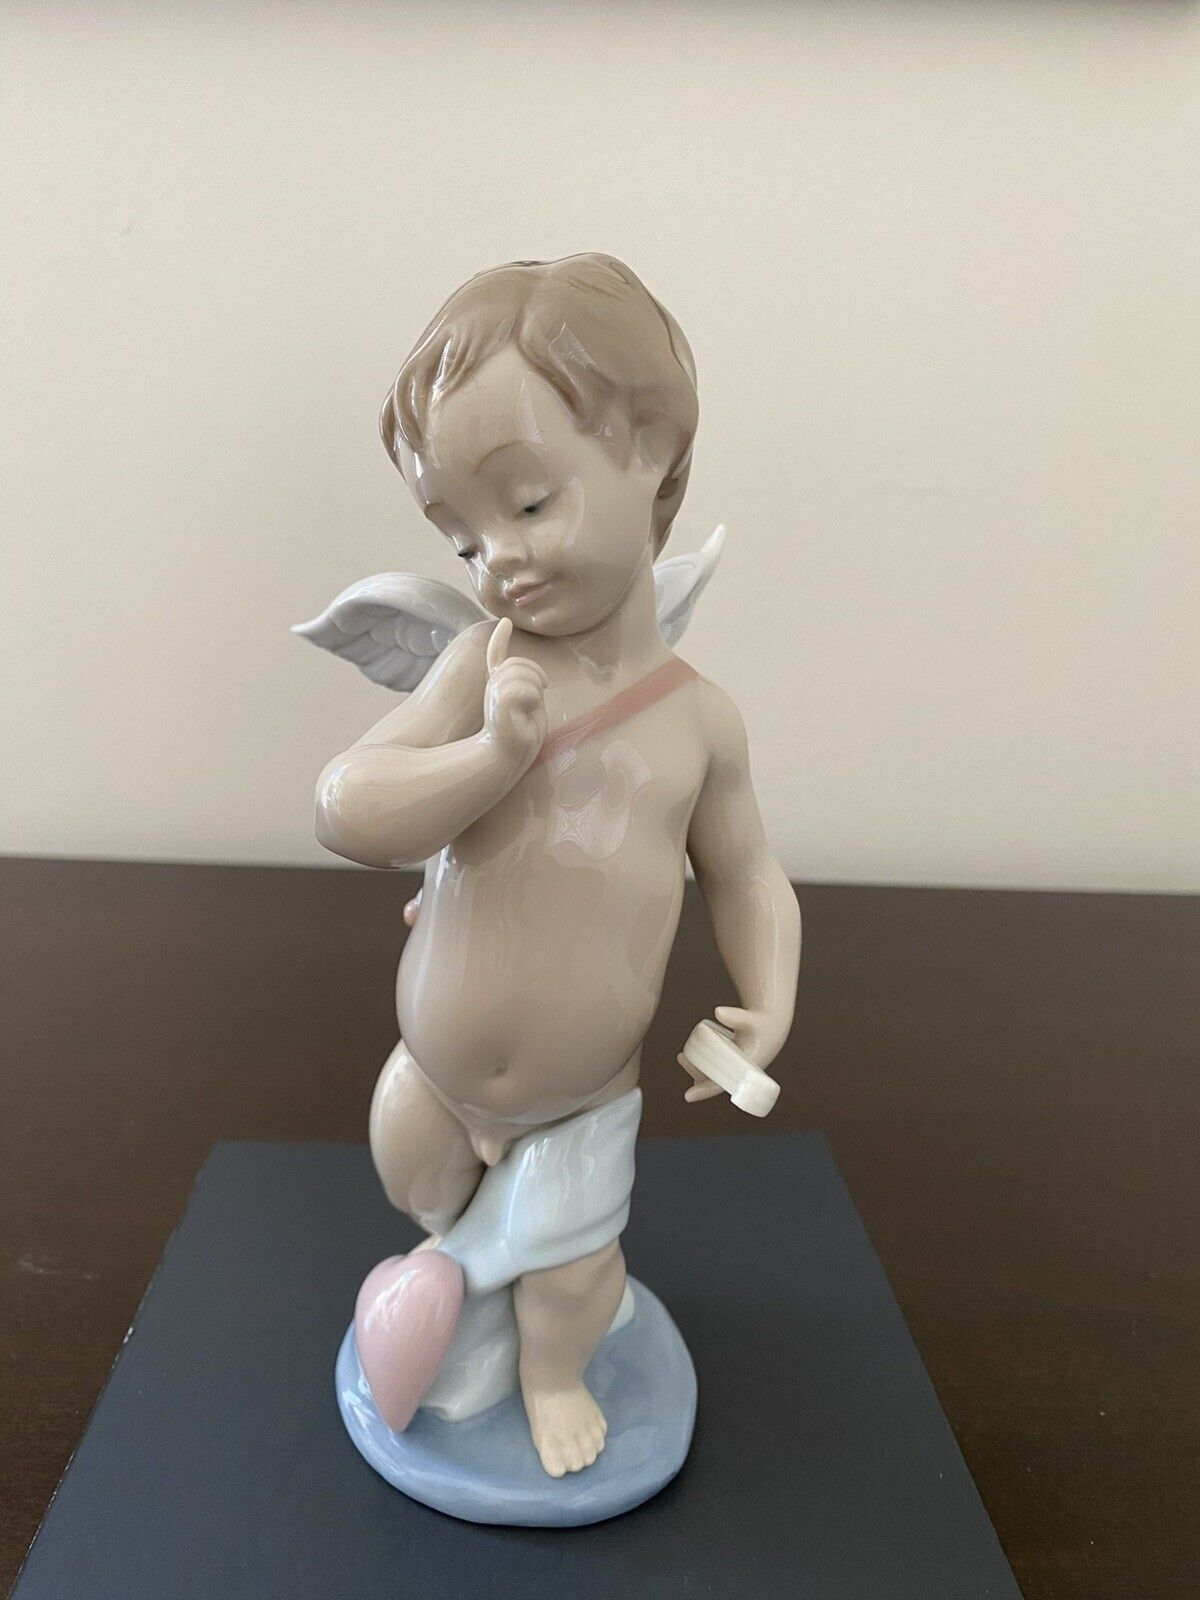 Lladro 6311 CUPID (LOVE ARCHER ANGEL), issued 1996, retired 2001 - 7.75 inch